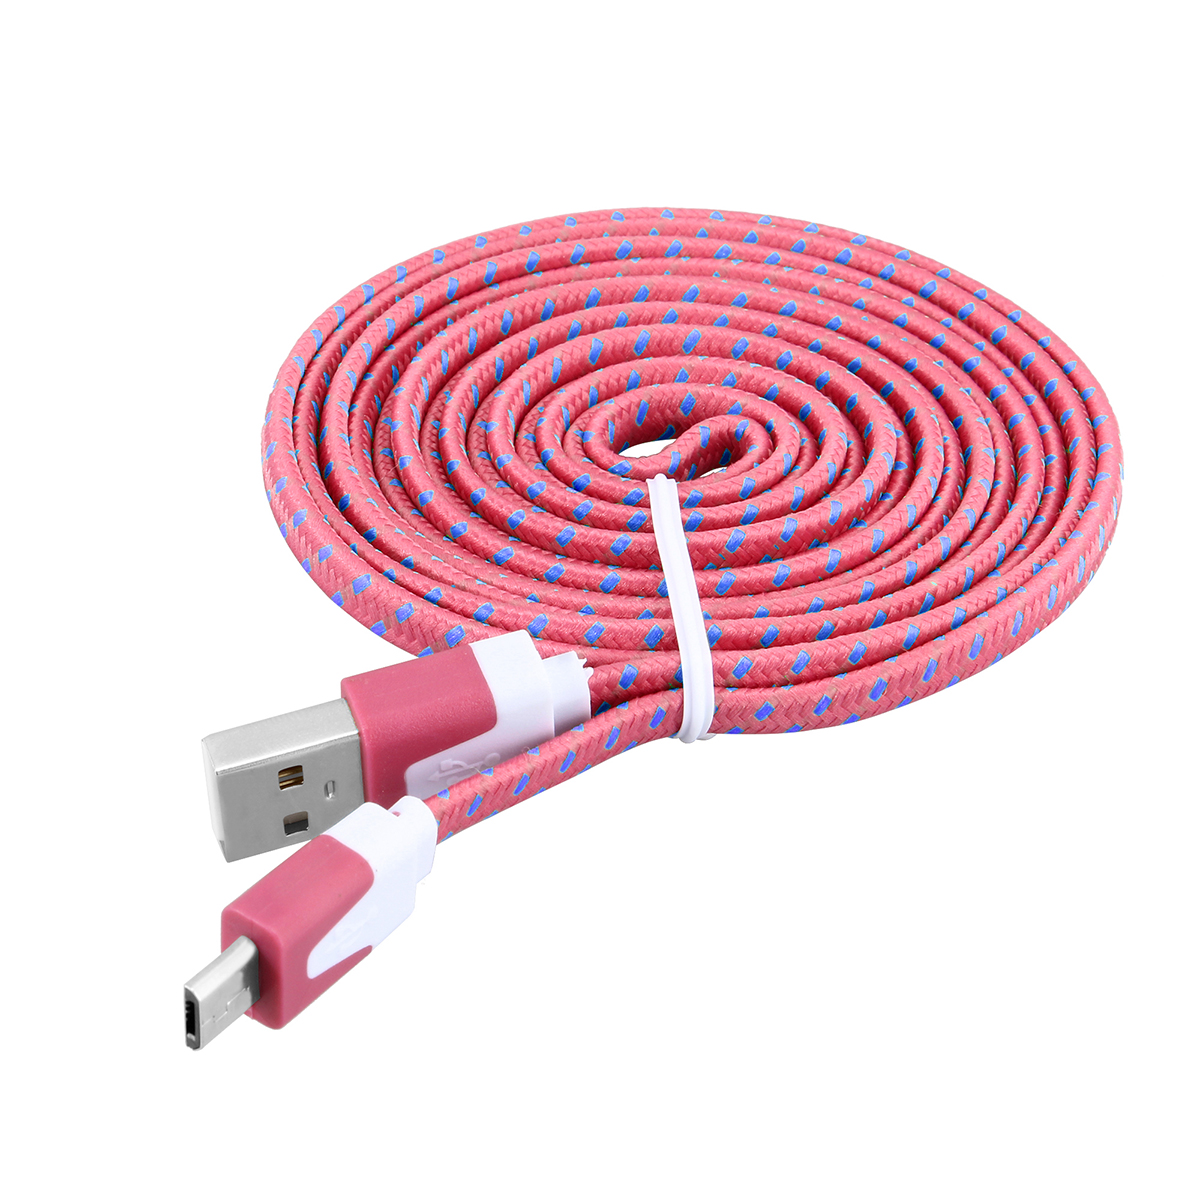 3m Weave Braid USB Data Sync Charging Cable for Samsung Android Phones - Pink